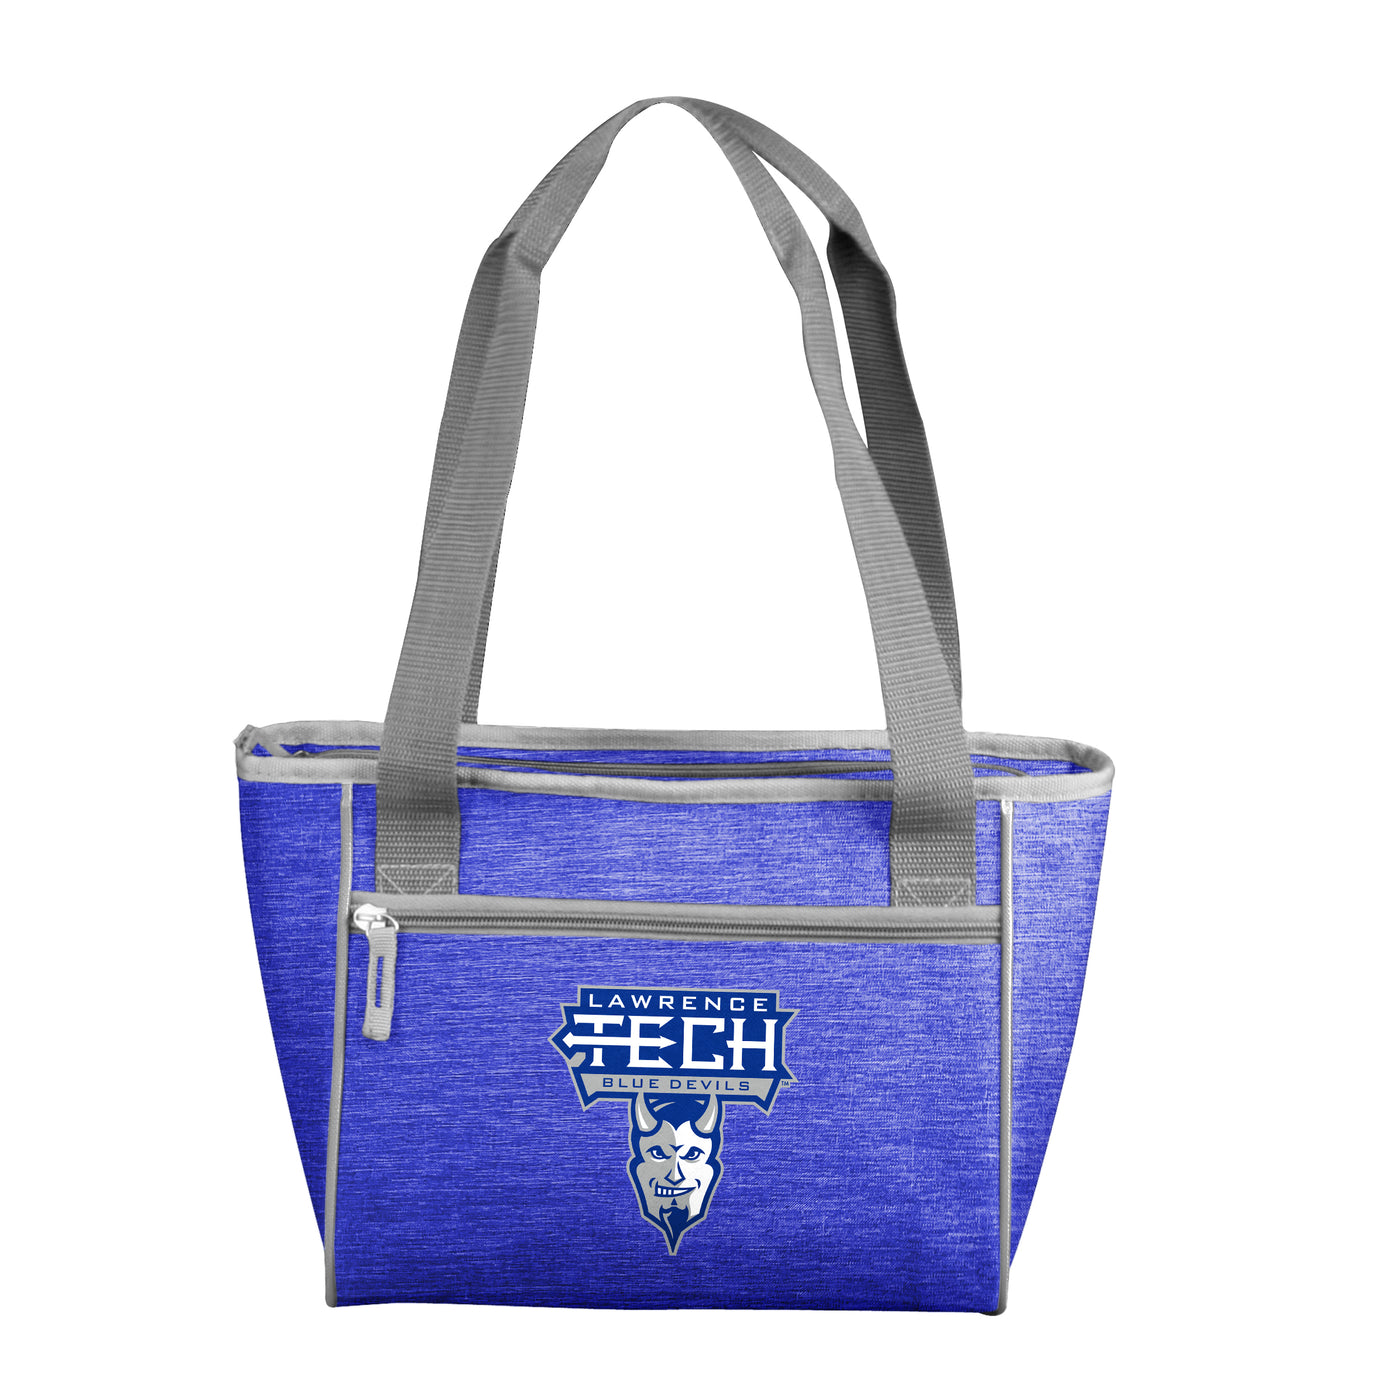 Lawrence Tech 16 Can Cooler Tote